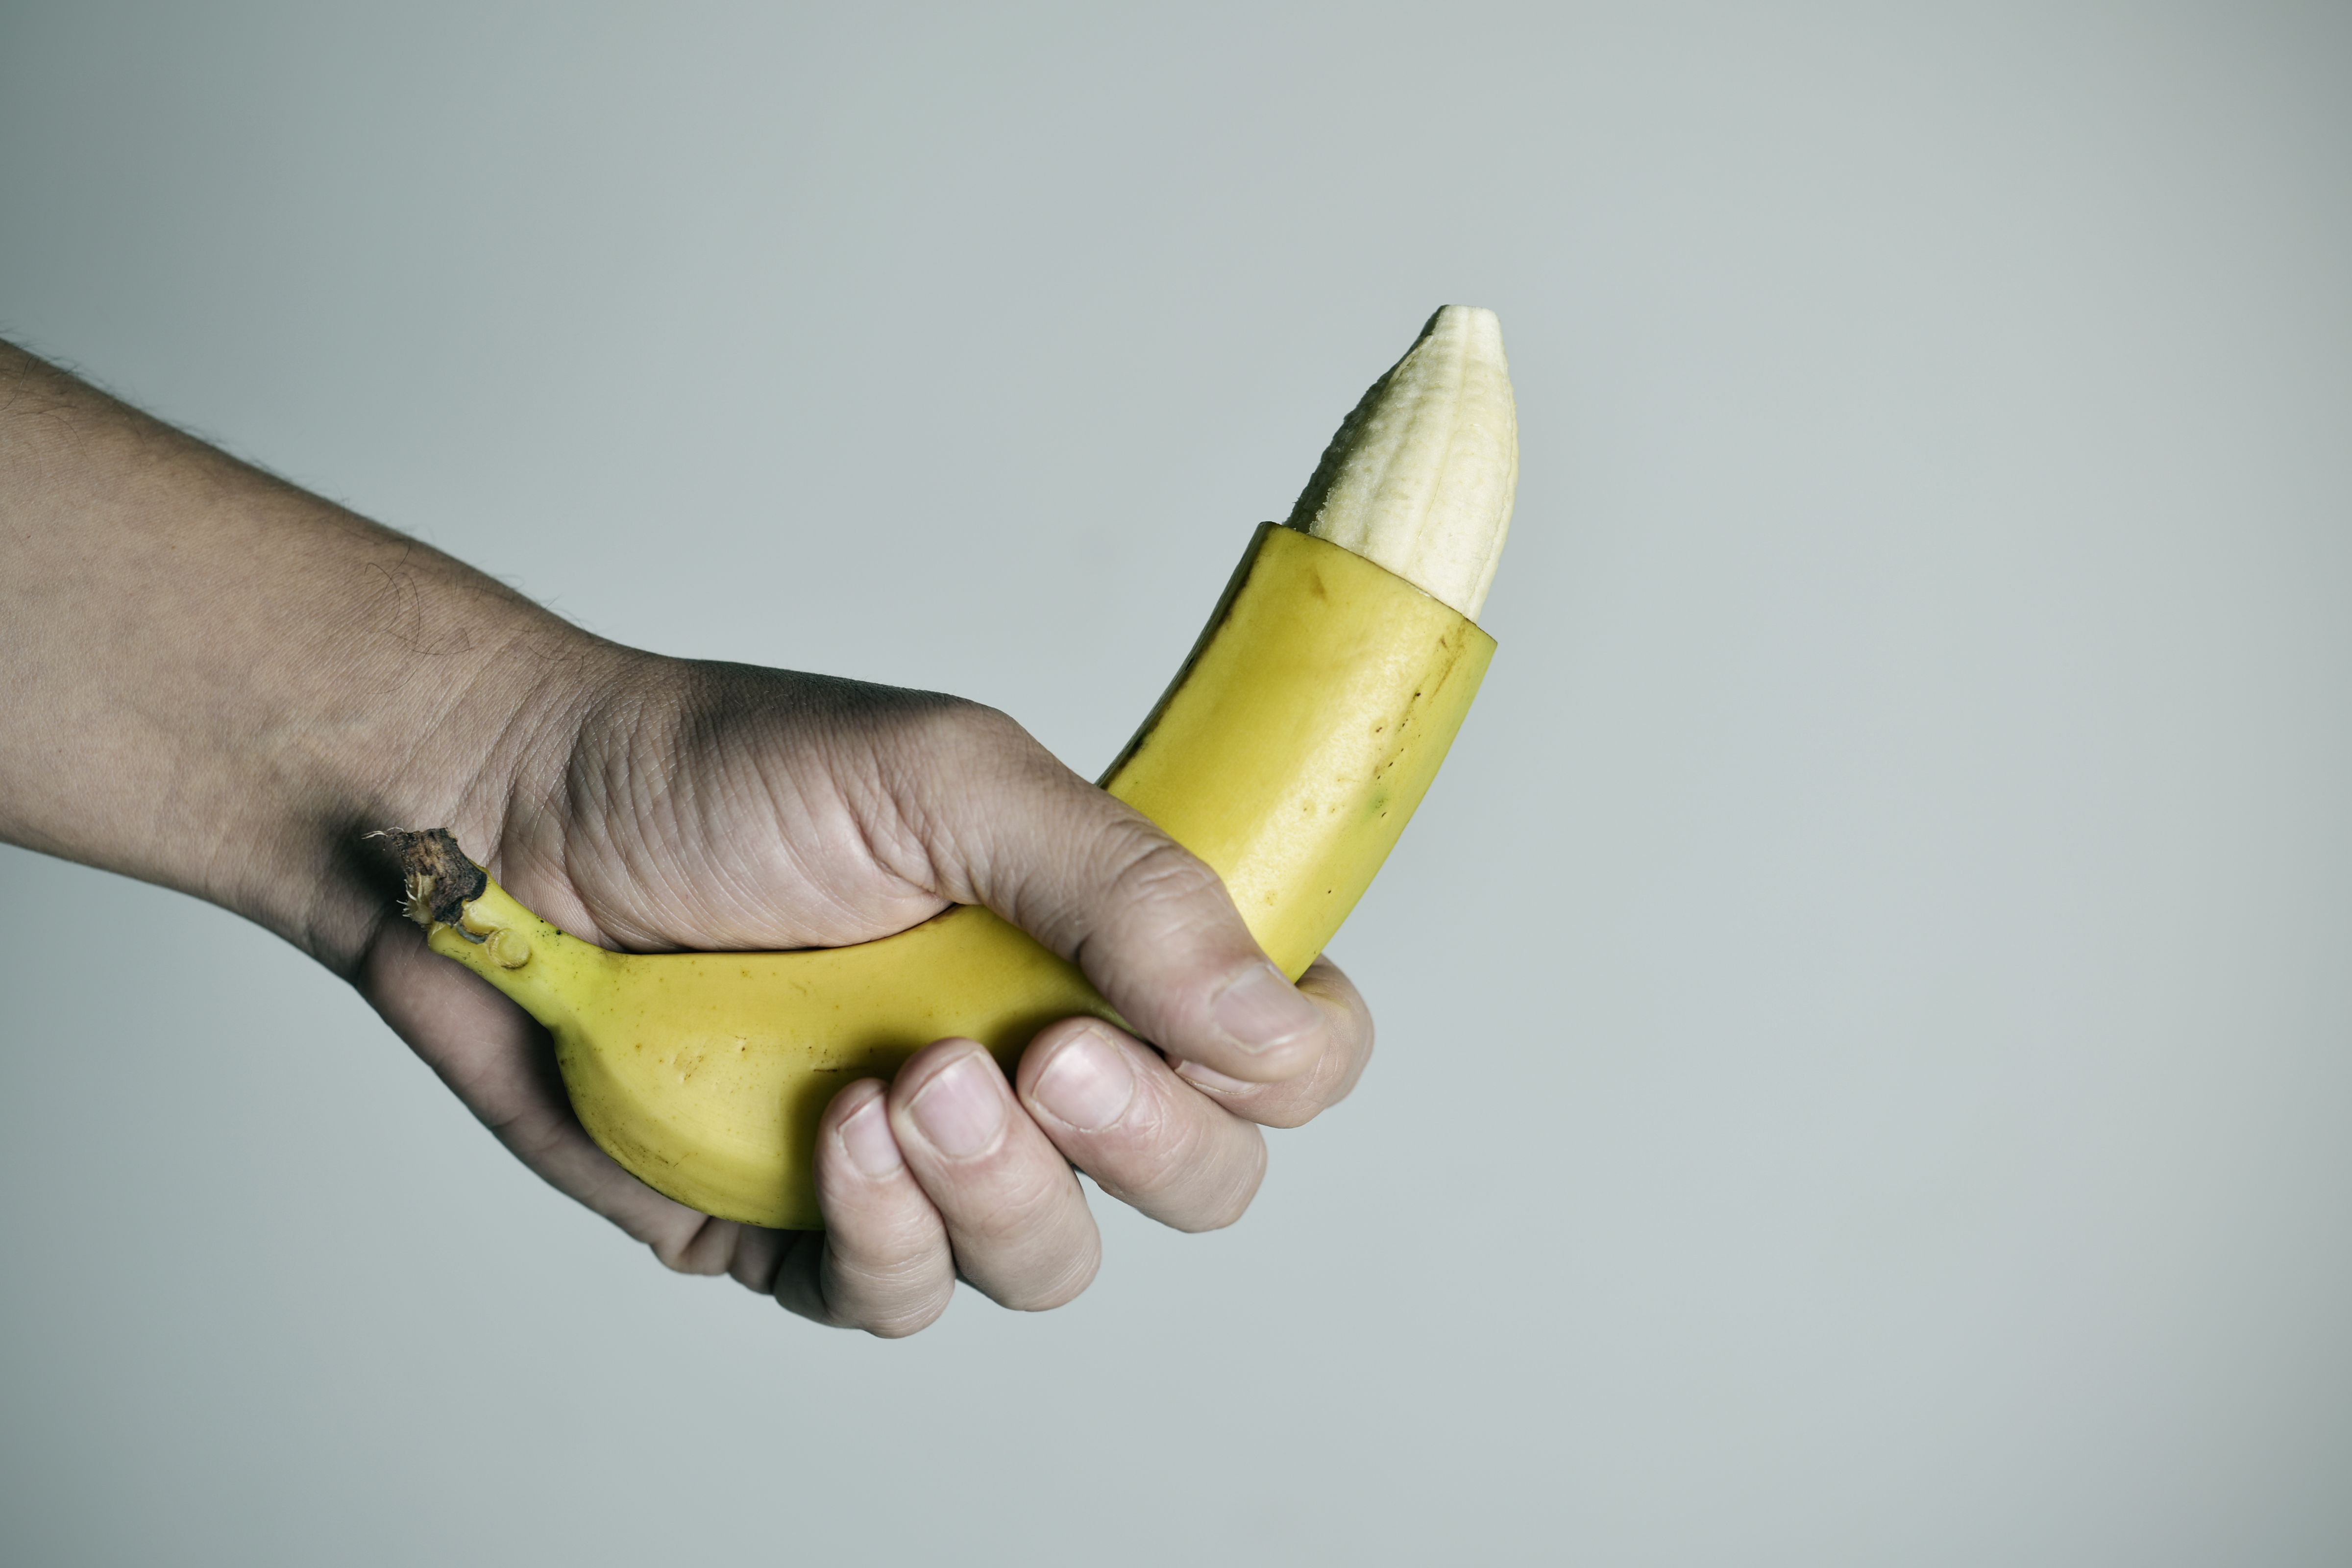 How Adult Circumcision Affects Your Sex Life, According to Experts